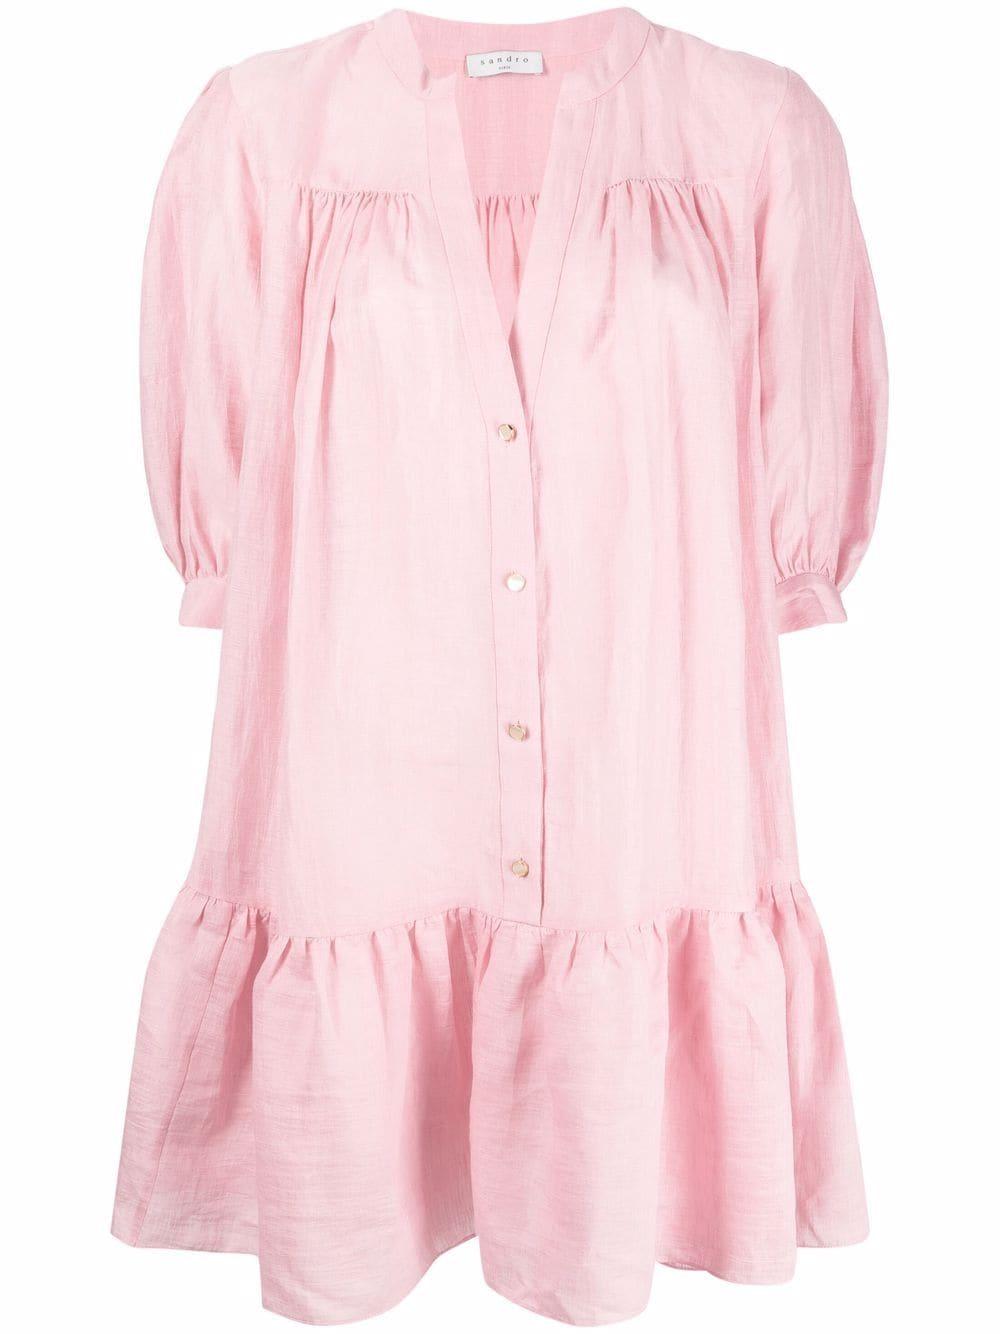 Sandro Button-up Shirt Dress in Pink | Lyst